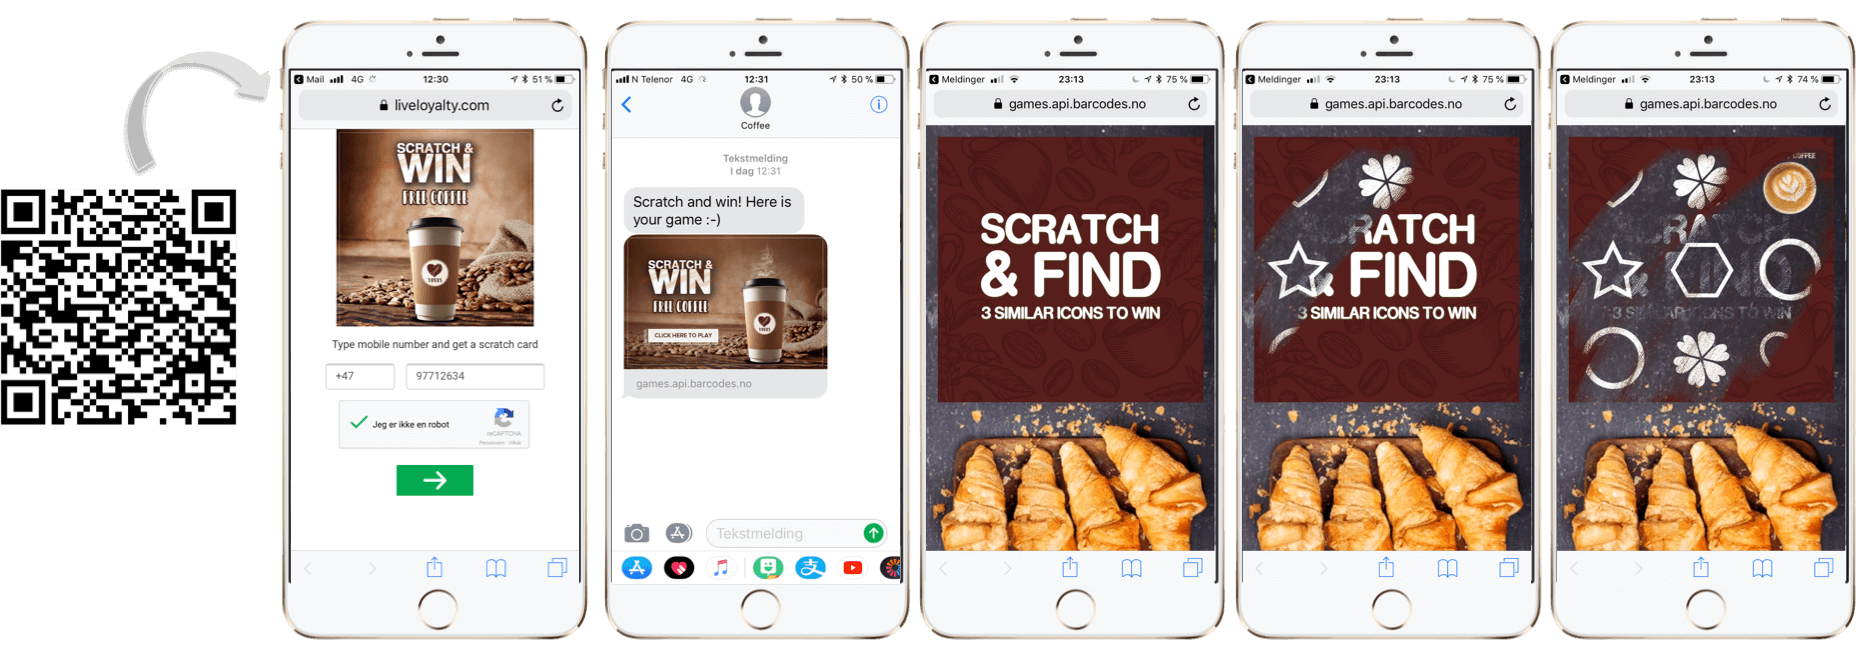 Scratch and win free coffee